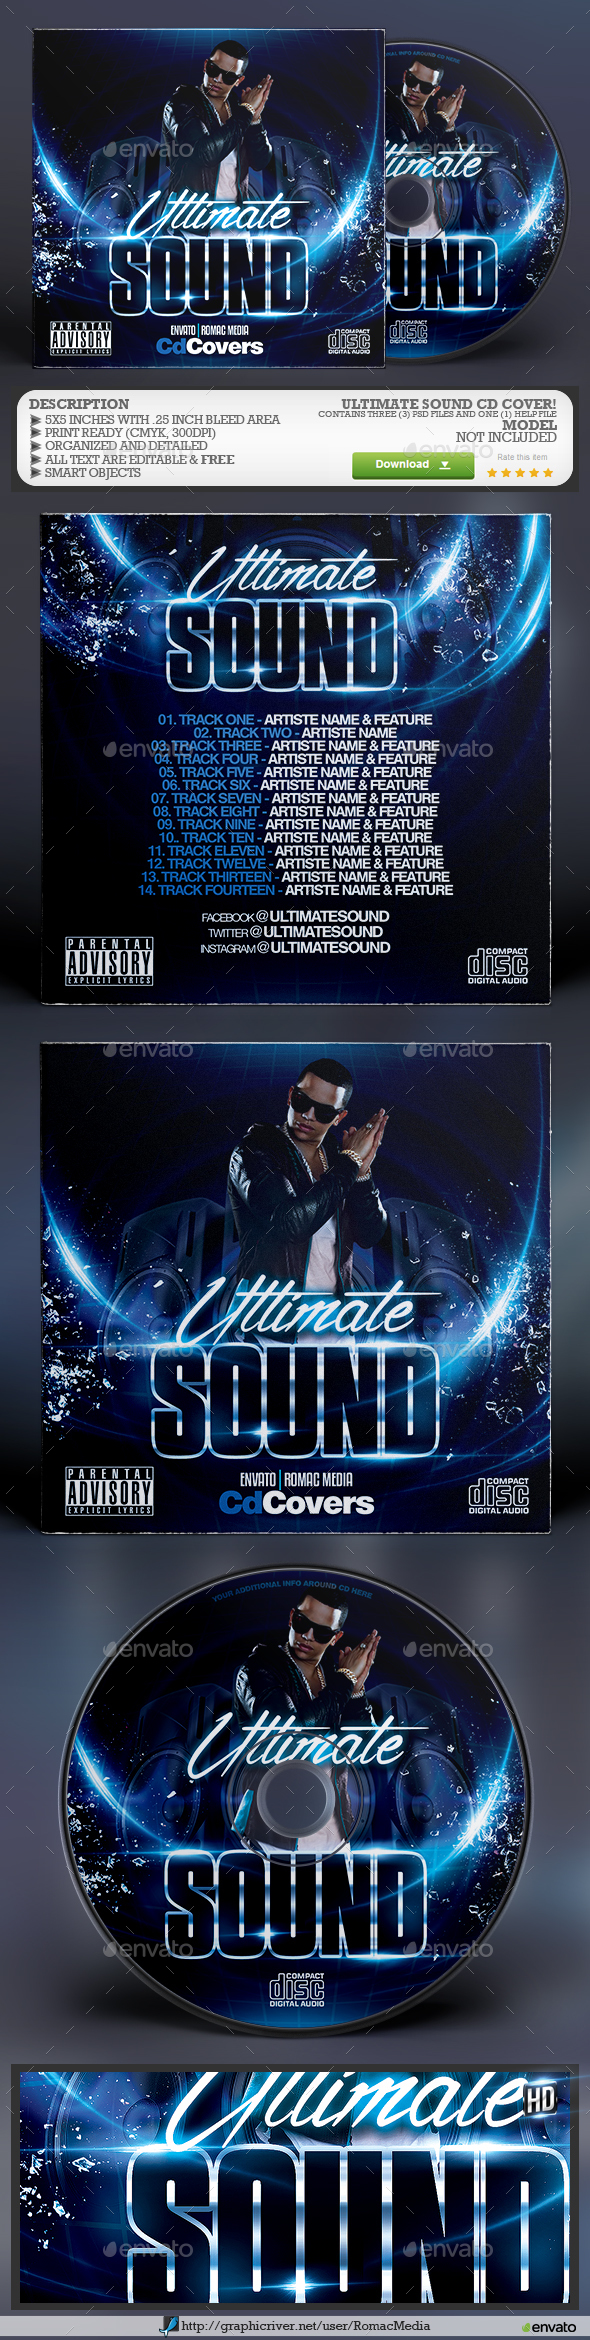 Ultimate Sound CD Cover